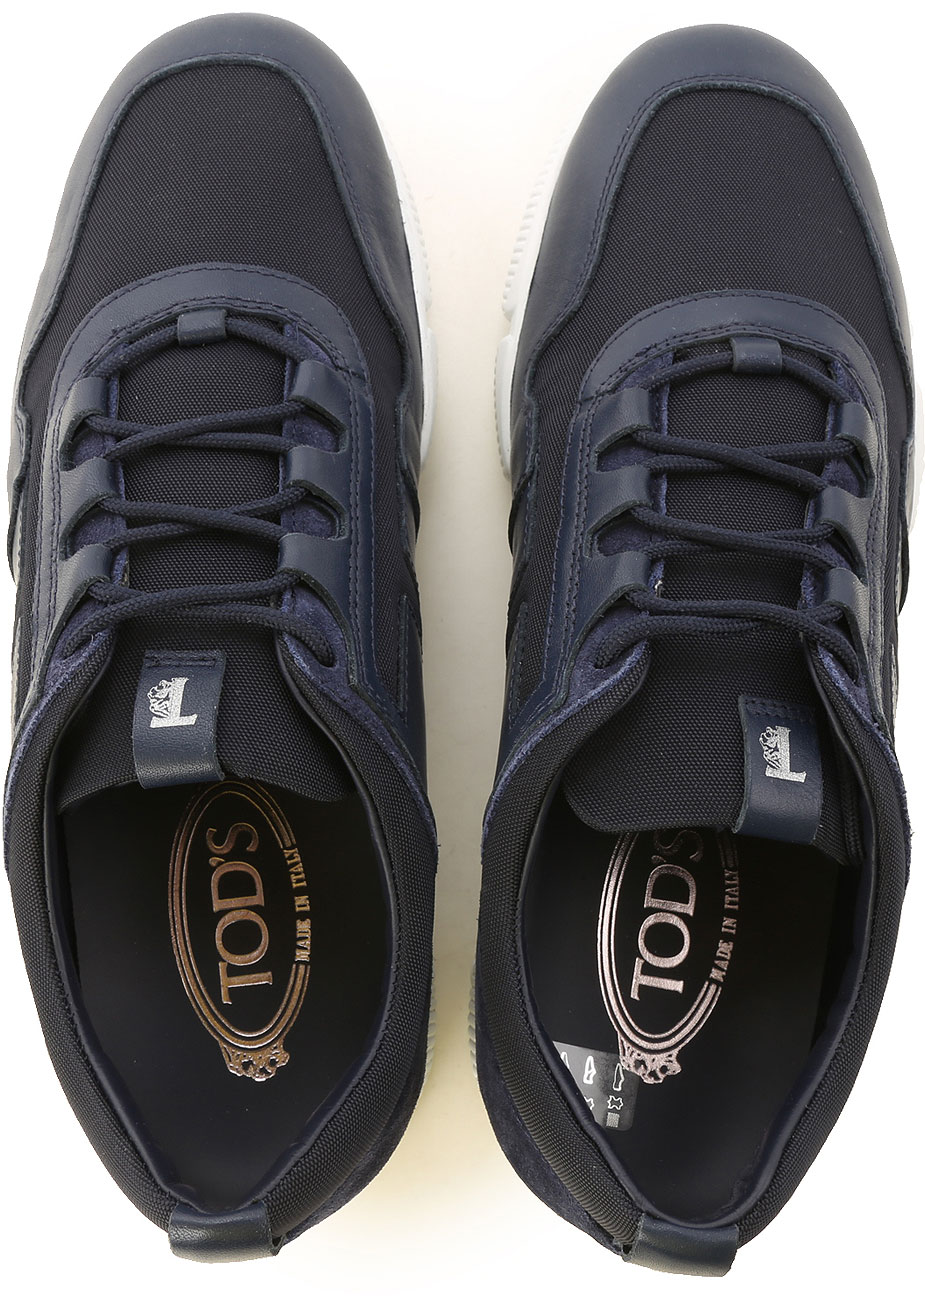 Mens Shoes Tods, Style code: xxm25c0cp50nxmhg89--